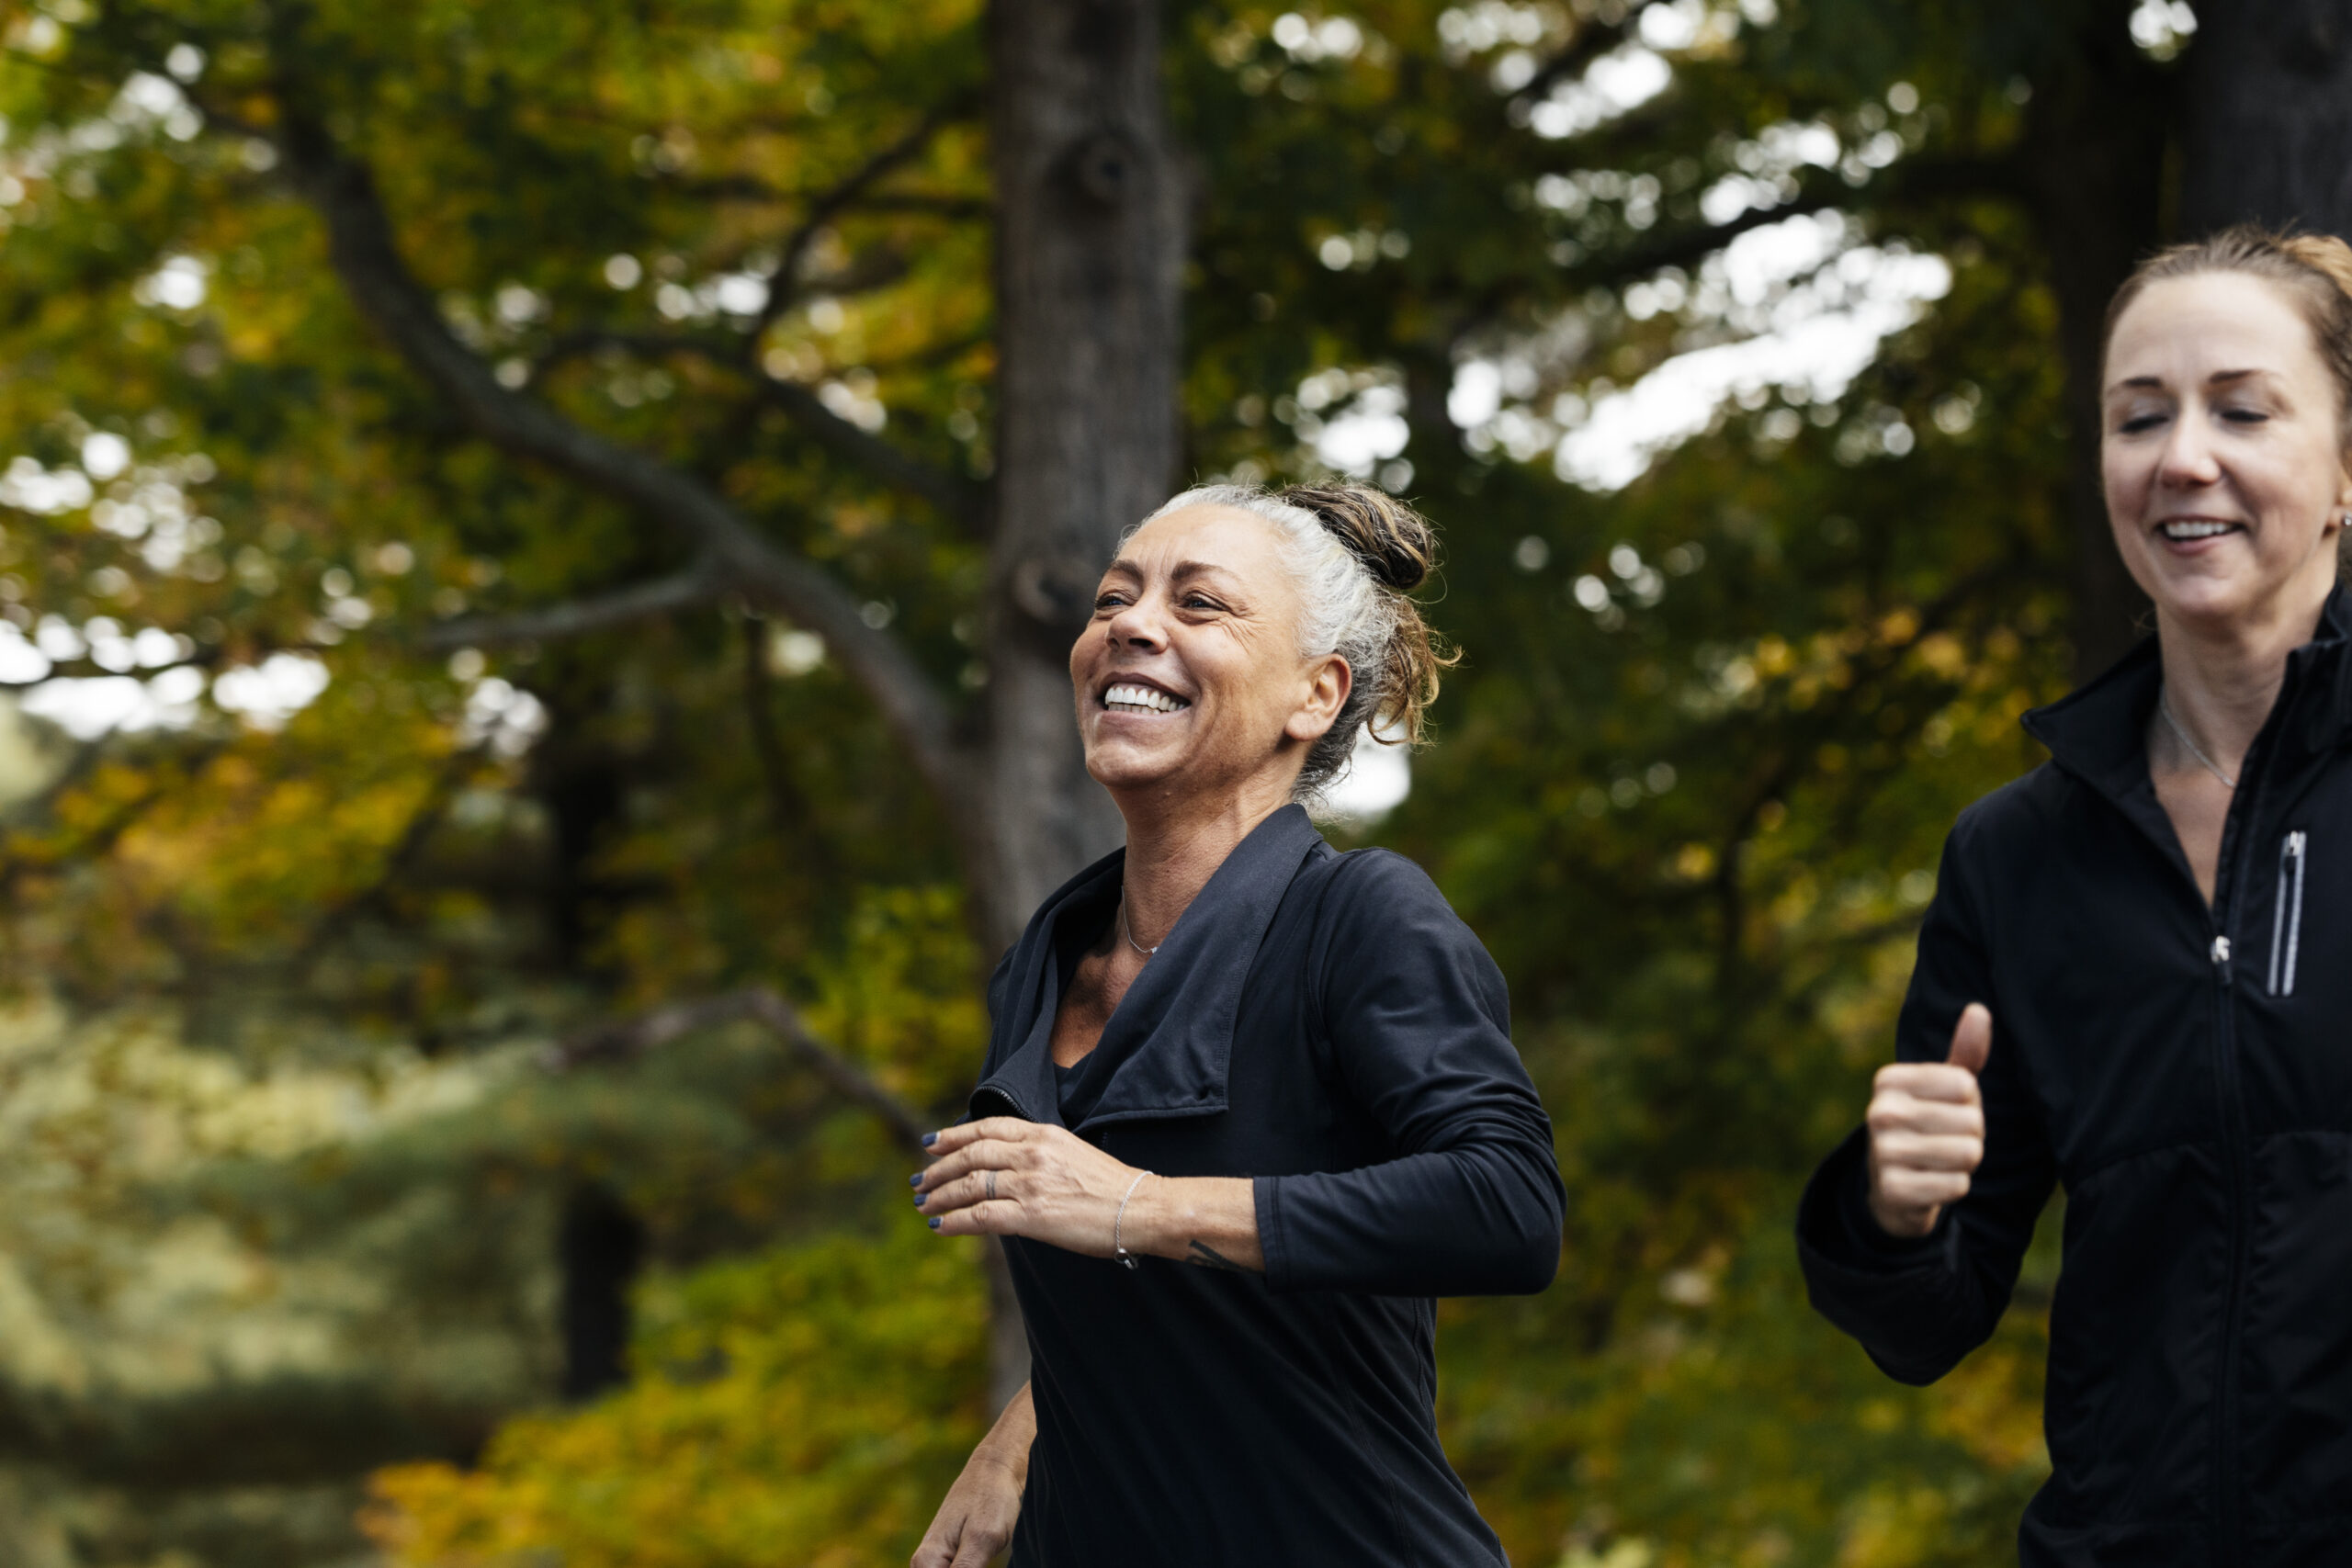 Cheerful mature woman with female friend jogging in forest